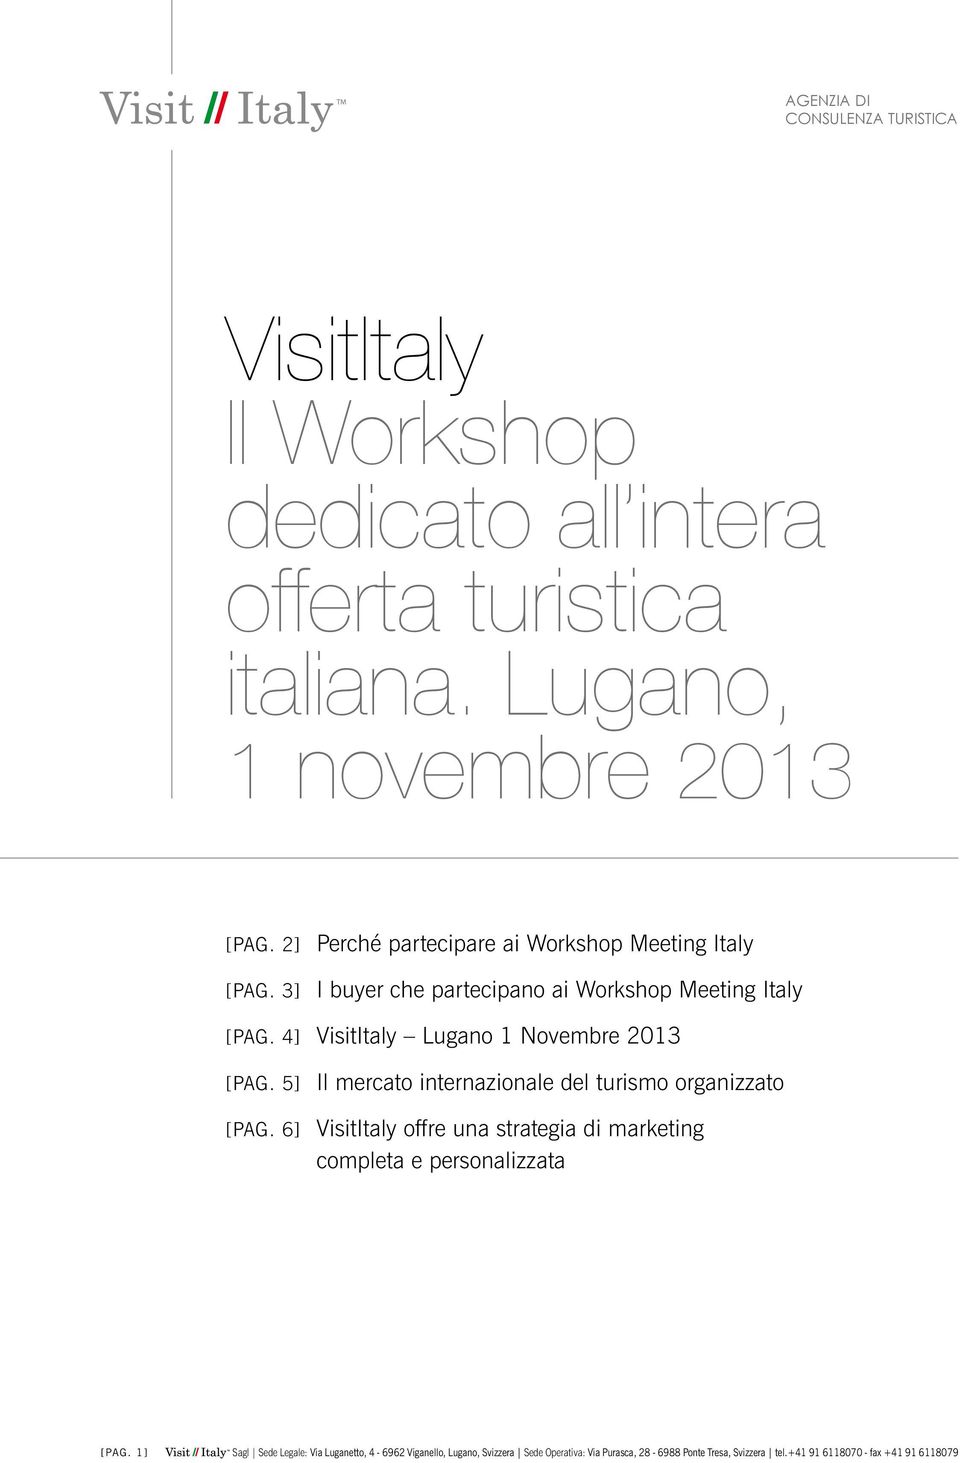 3] I buyer che partecipano ai Workshop Meeting Italy [pag.